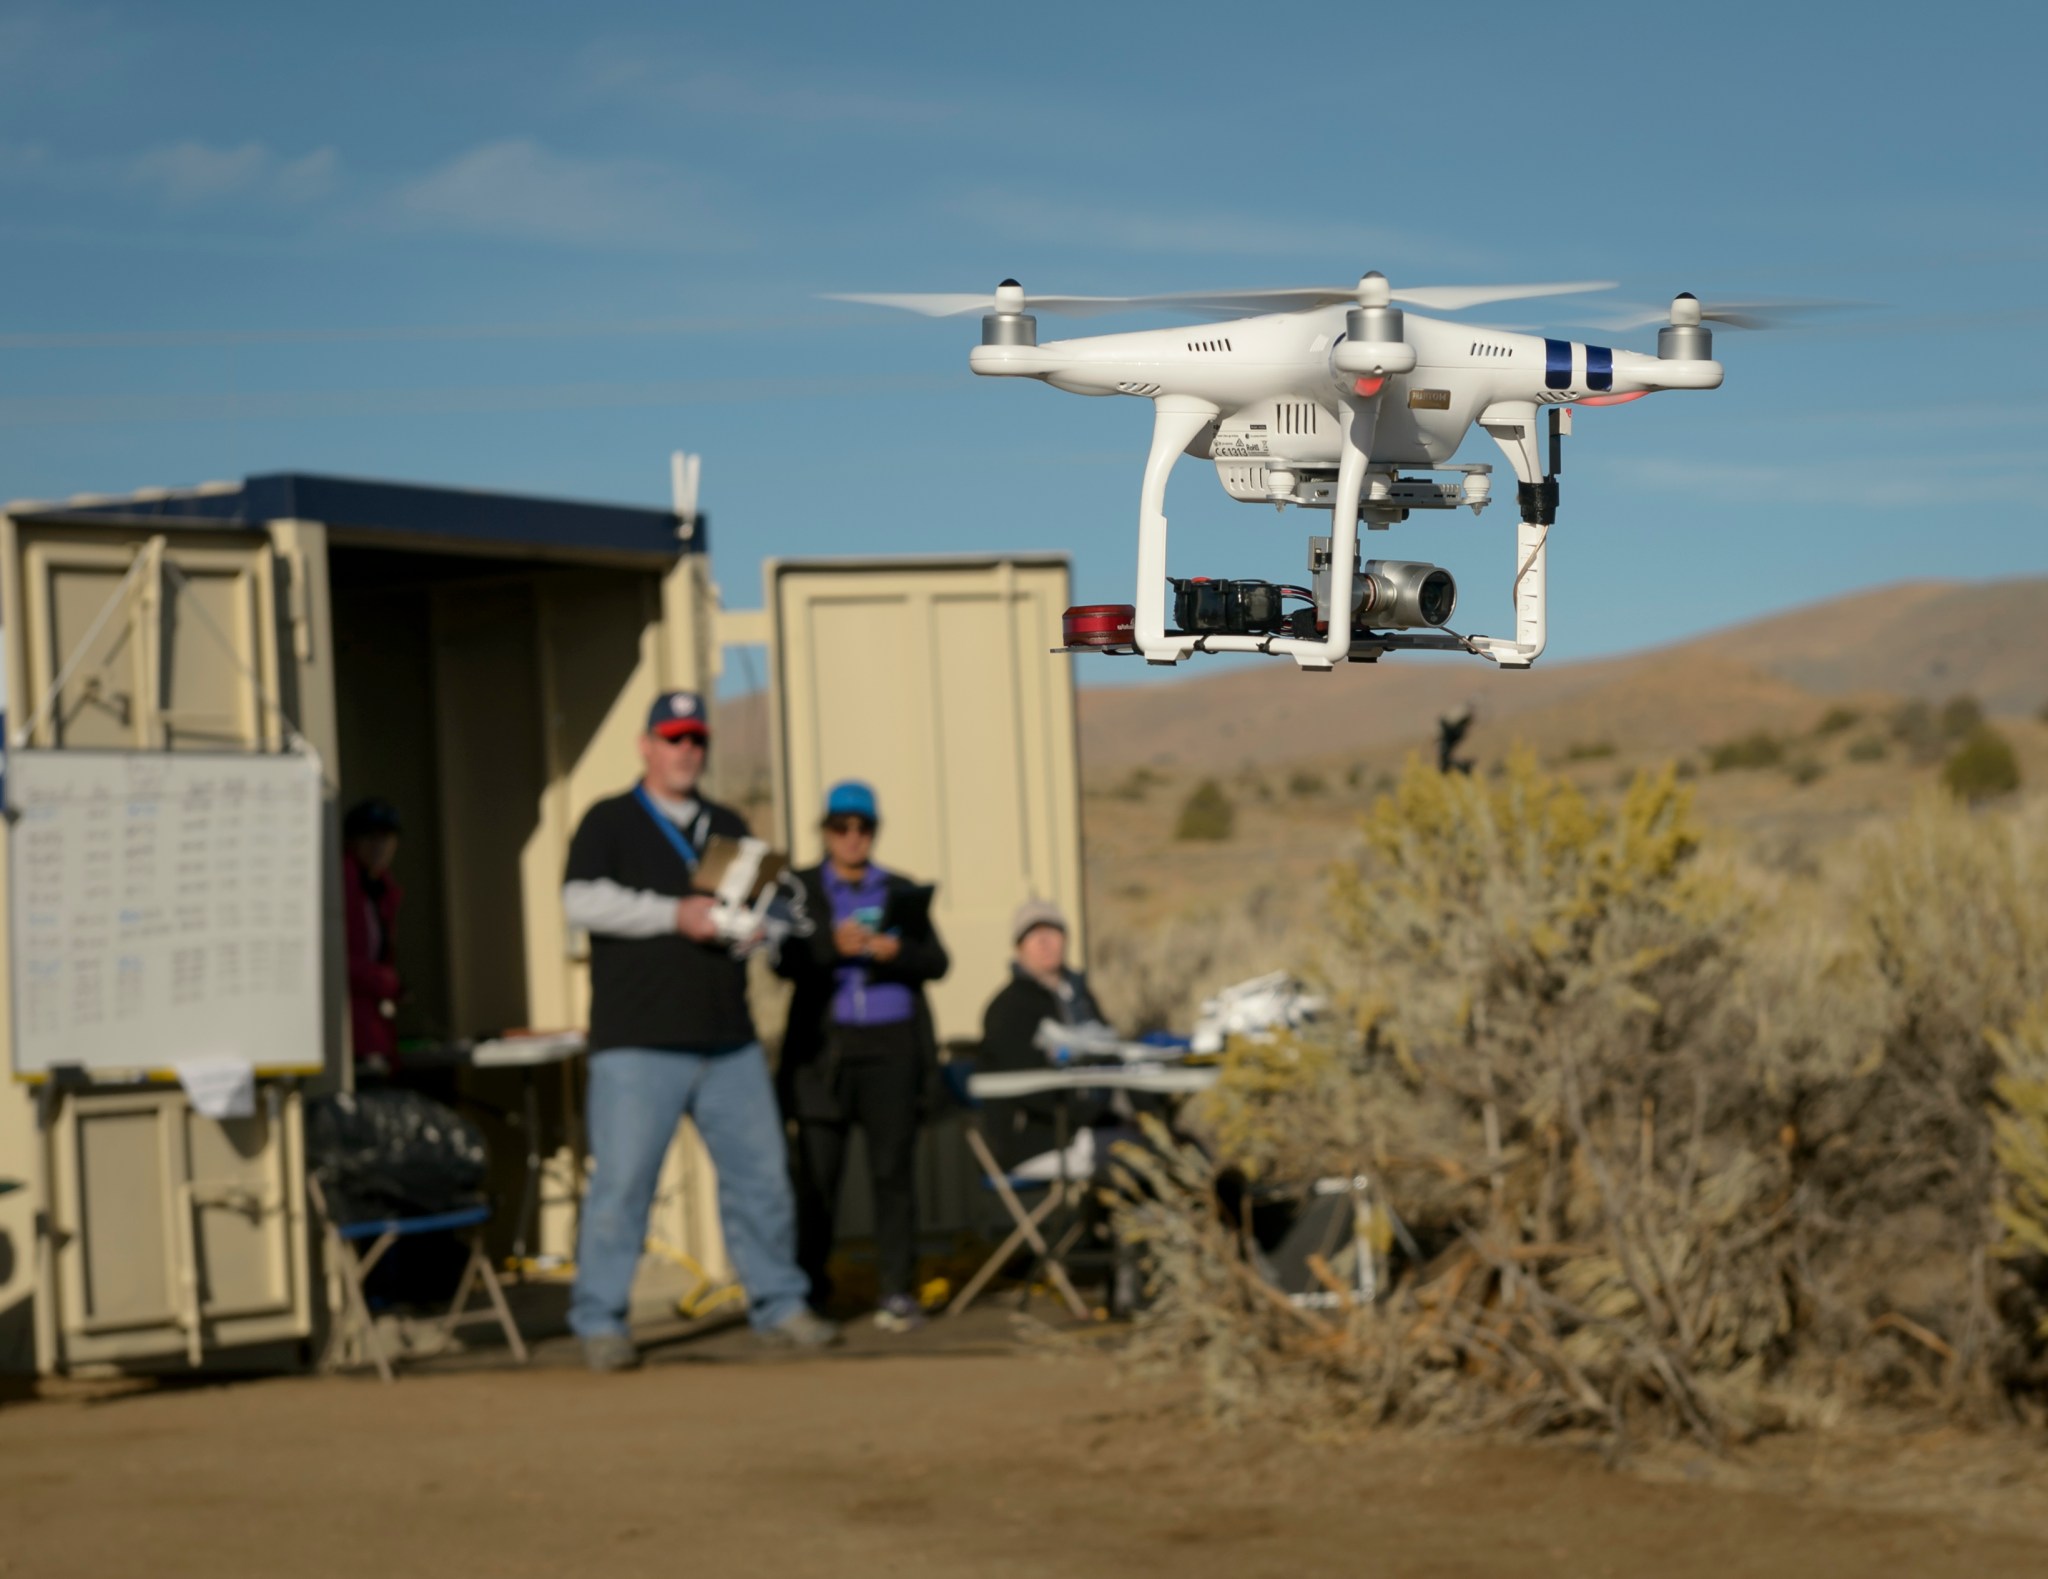 Photograph of drone being flown with operator and observers slightly out-of-focus in the background